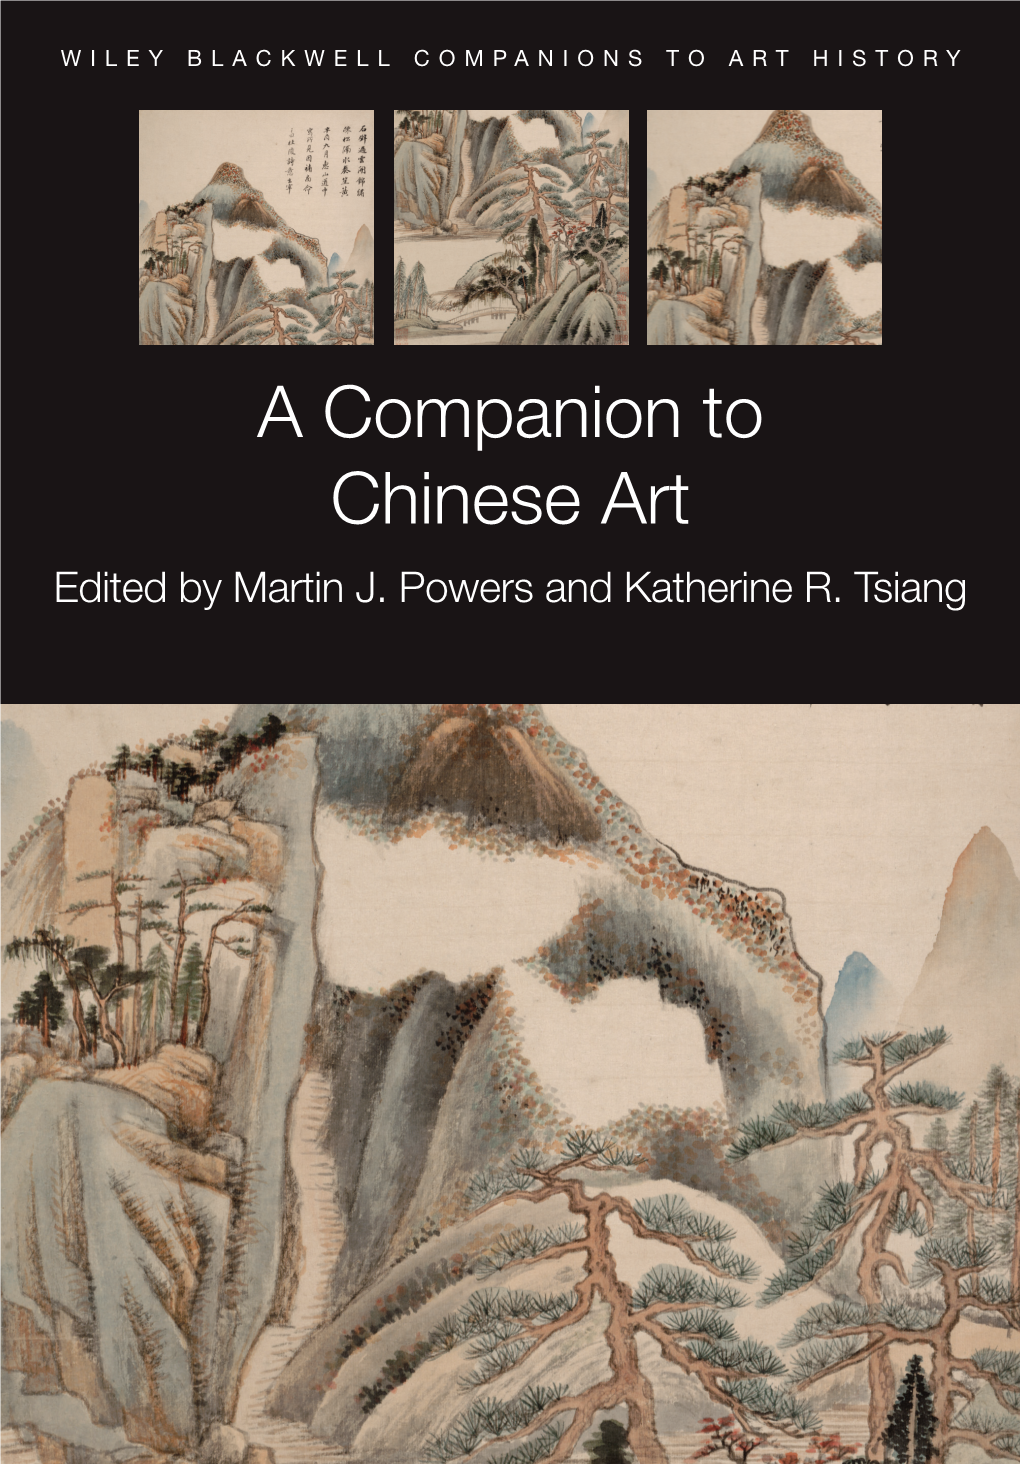 A Companion to Chinese Art Edited by Martin J